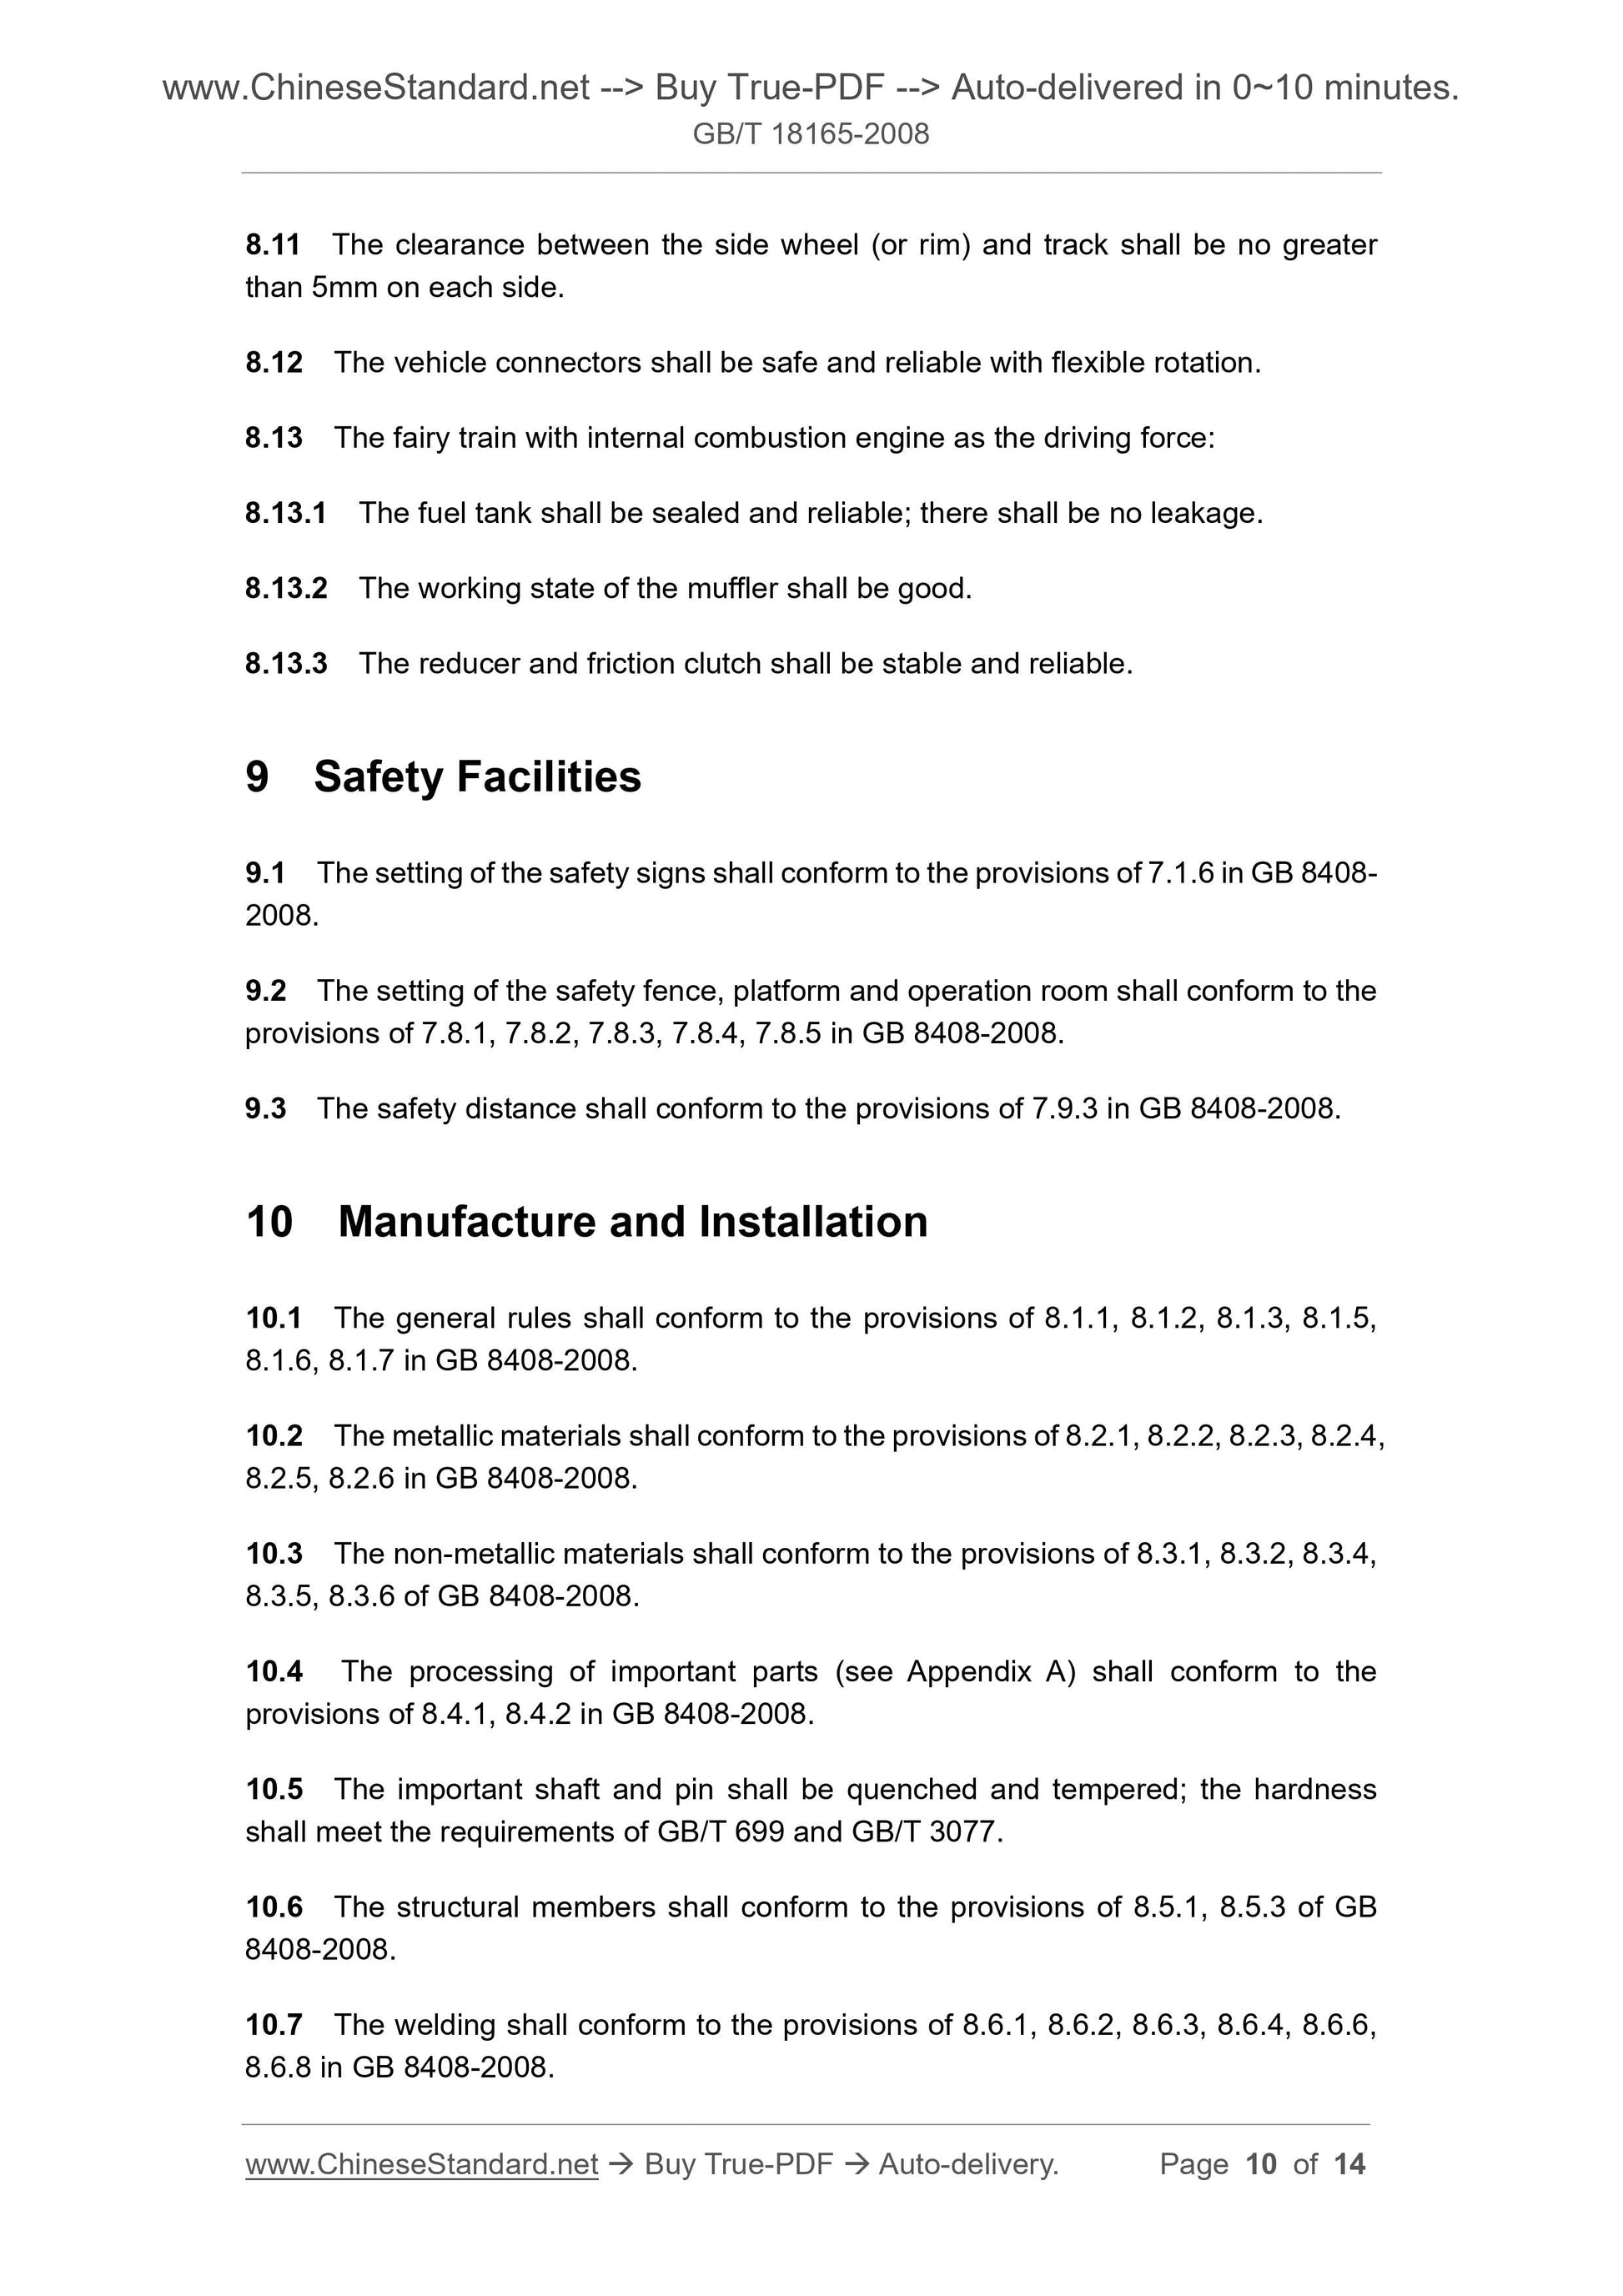 GB/T 18165-2008 Page 6